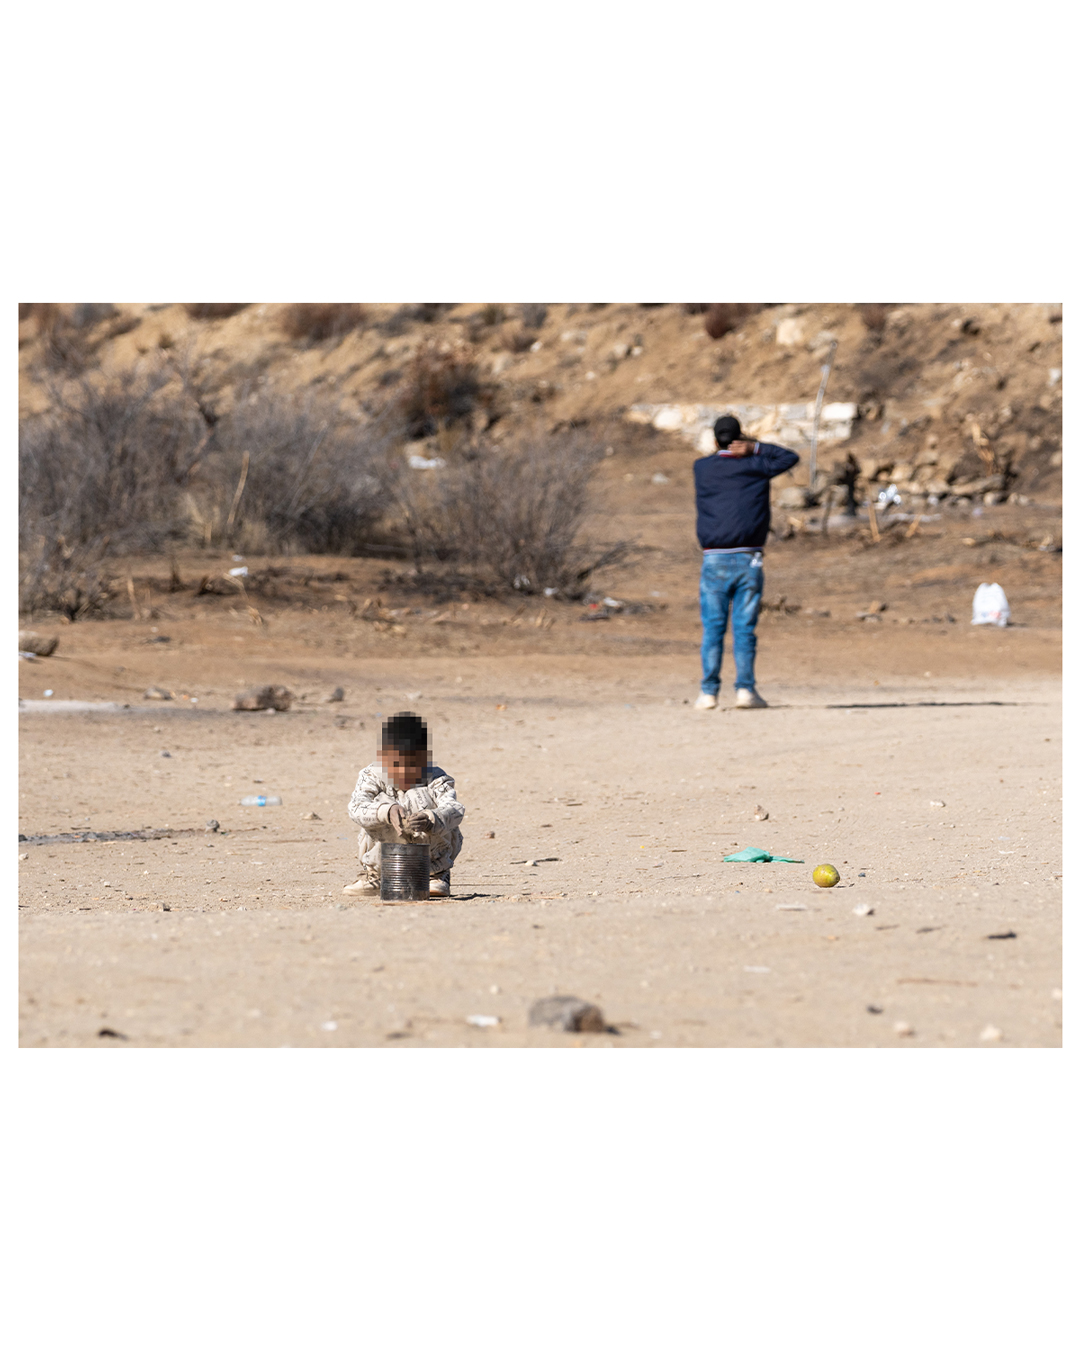 A small boy plays by pouring dirt into a tin can in an open desert field, littered with trash including empty water bottles and a lone lemon. A man in the background has his back turned to the child, his arm up behind his head.